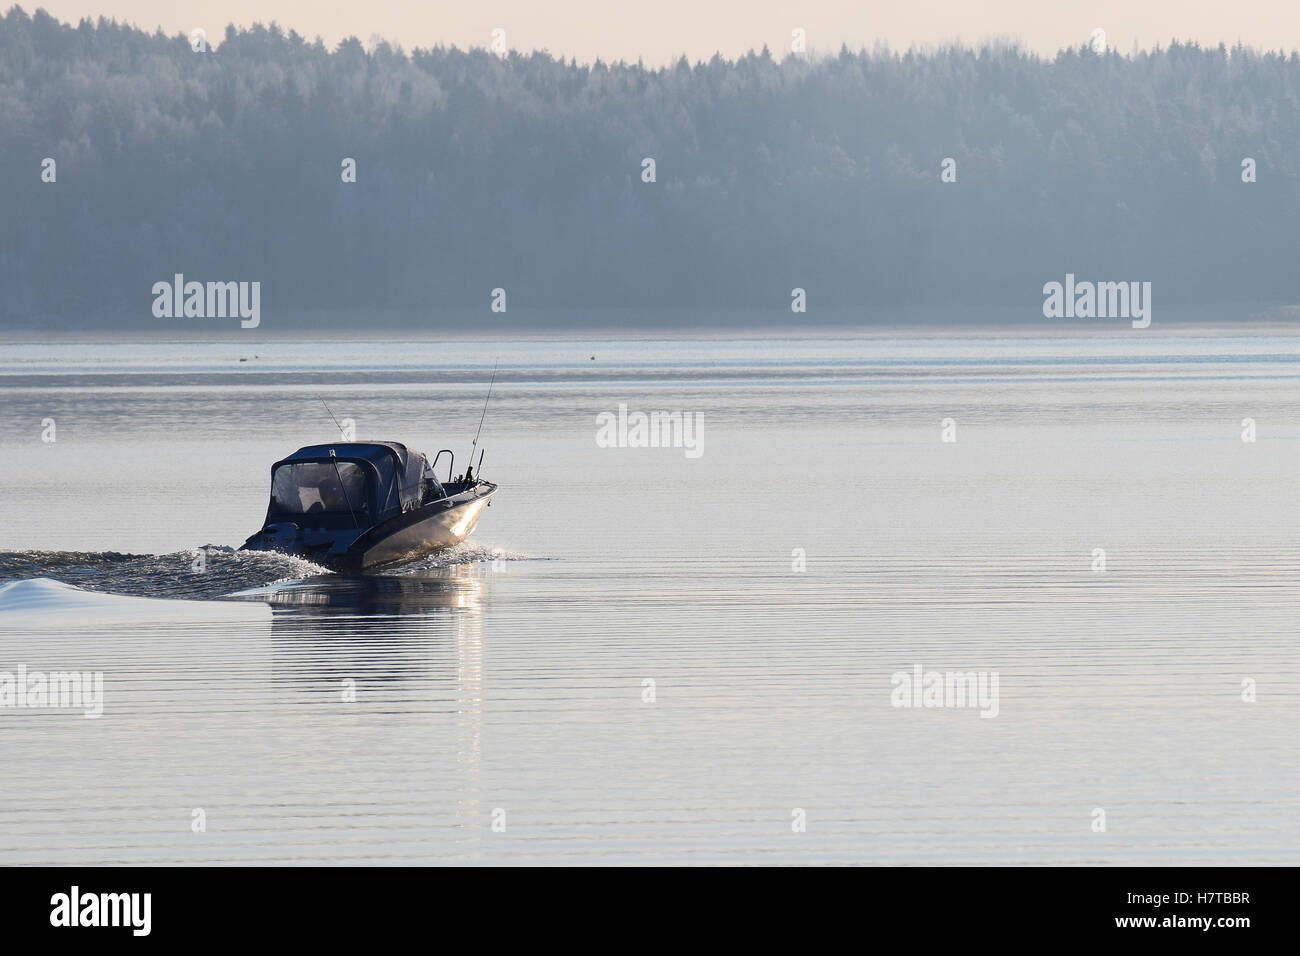 Motorboat on calm cold sea. Forest on background with rime. Photo taken in Parainen, Finland. Stock Photo